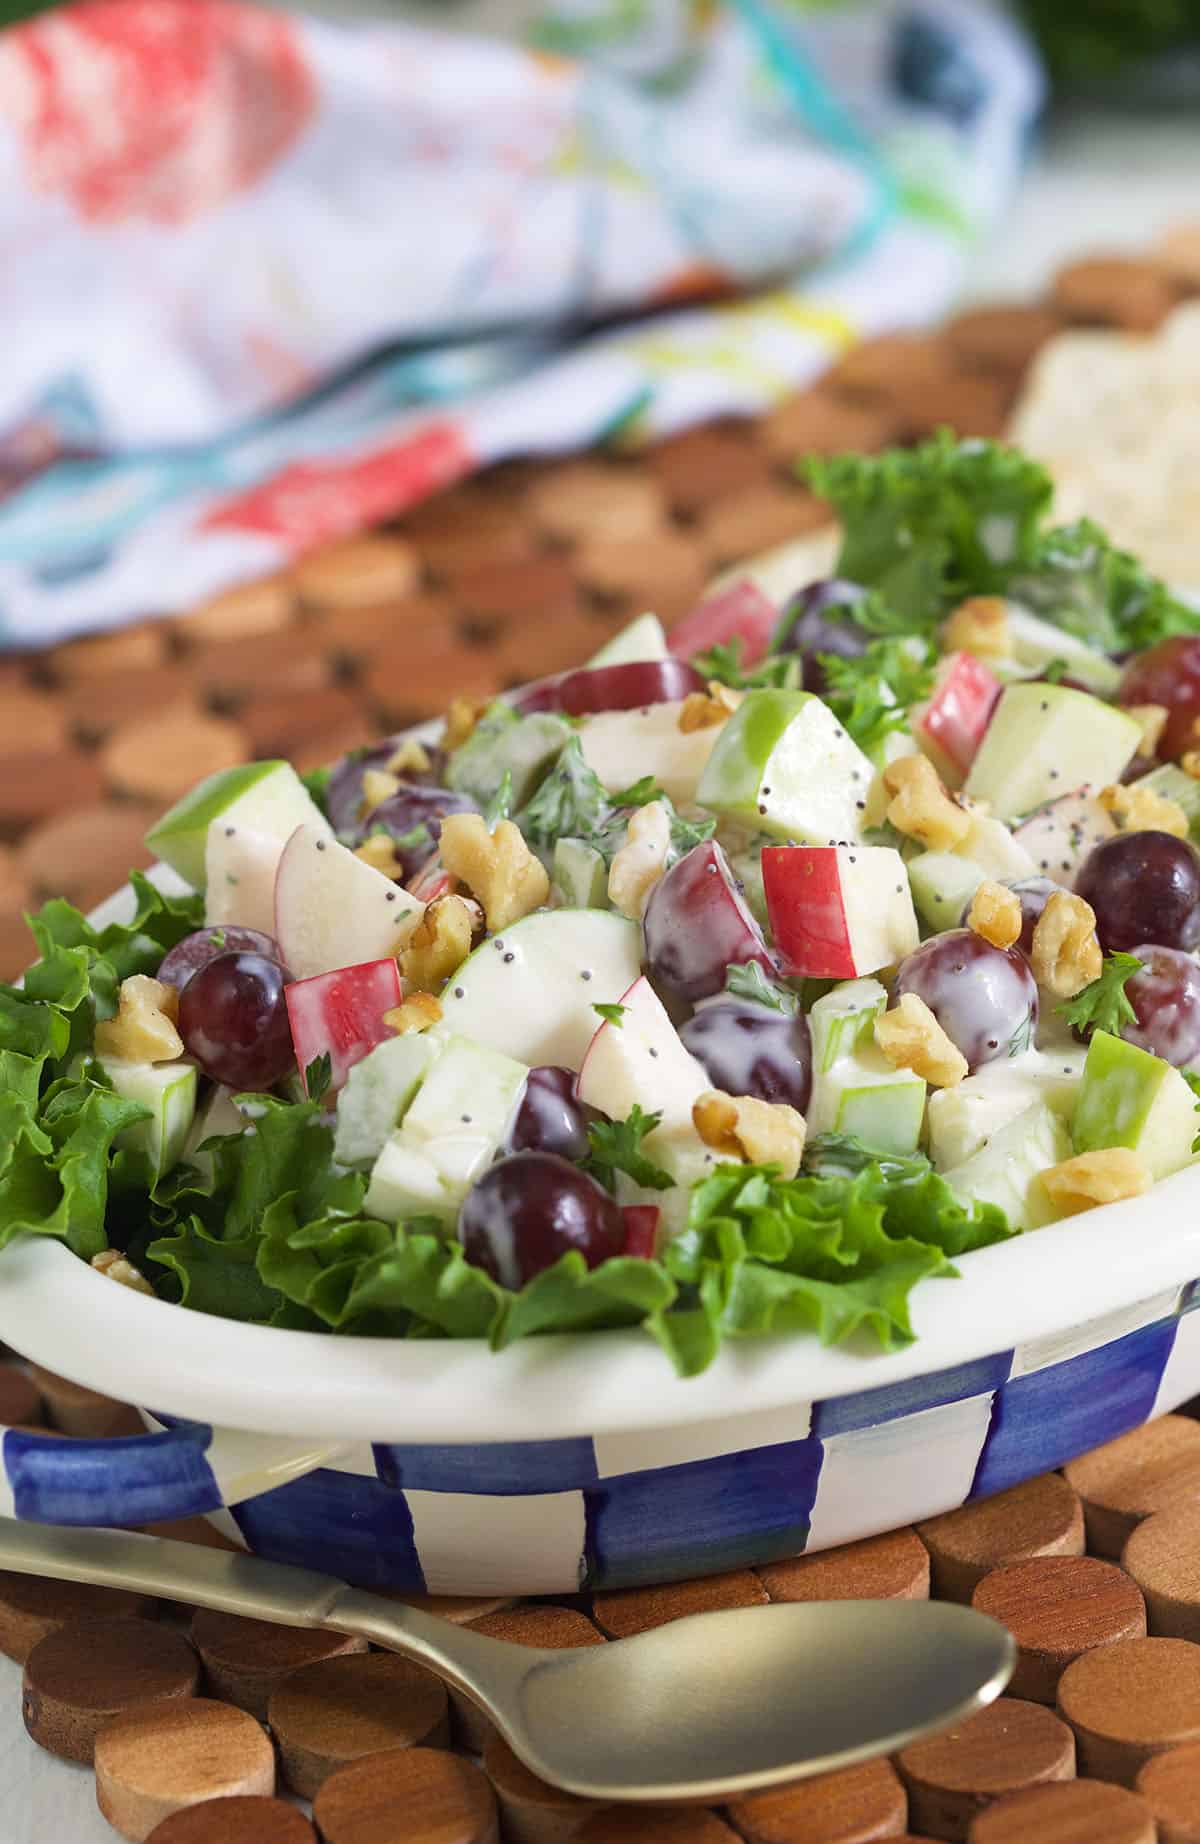 A blue and white checkered bowl is filled with freshly tossed Waldorf salad.